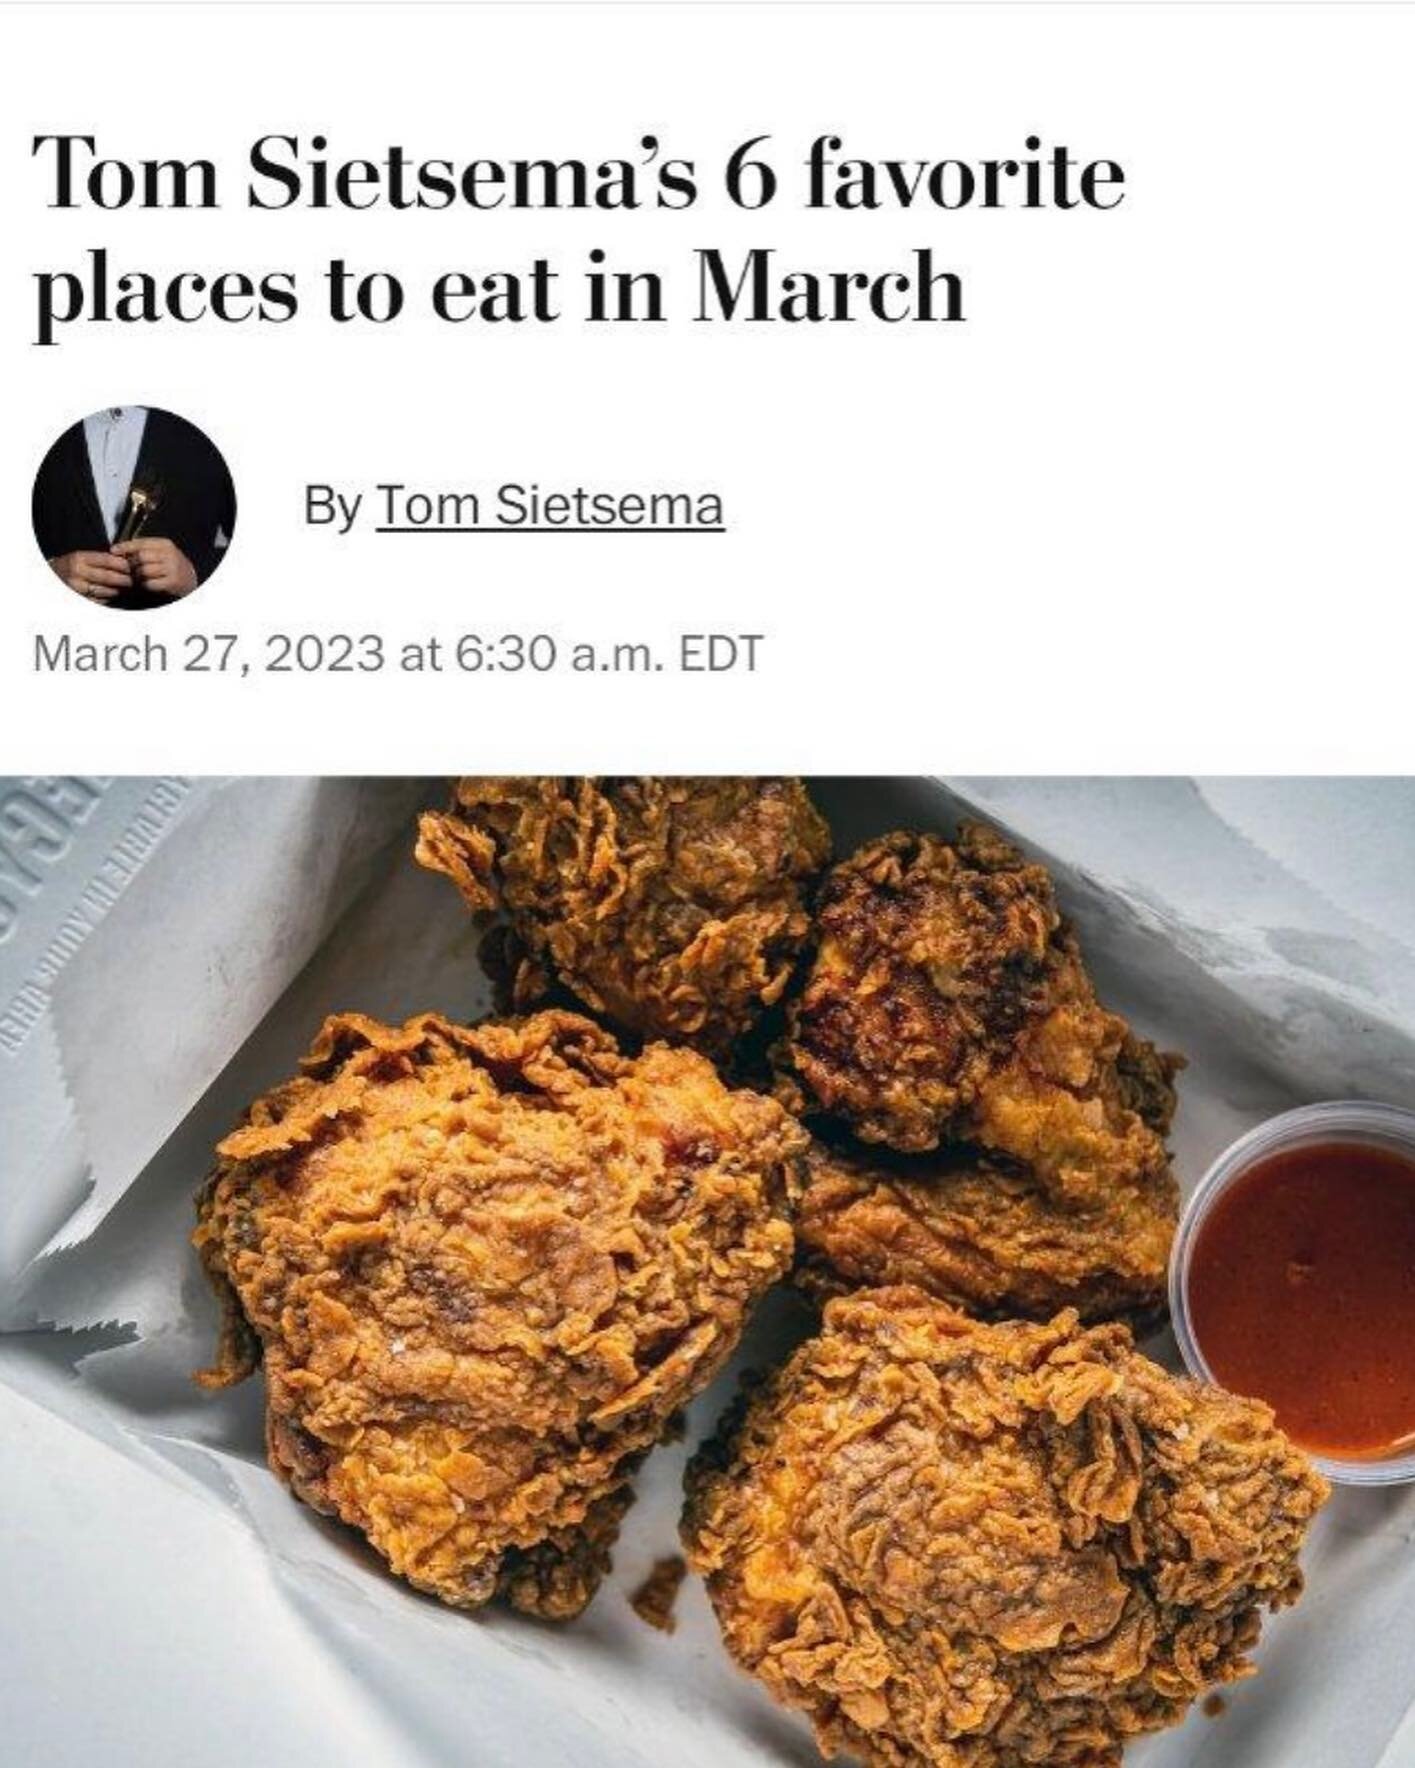 Thank You !! to @tomsietsema for including us in your &ldquo;6 favorite places to eat in March&rdquo; column! [link in bio] 

But there are only 4 service days left in March, so HURRY!!

Just kidding. It&rsquo;ll be fine if you reserve for April. We&